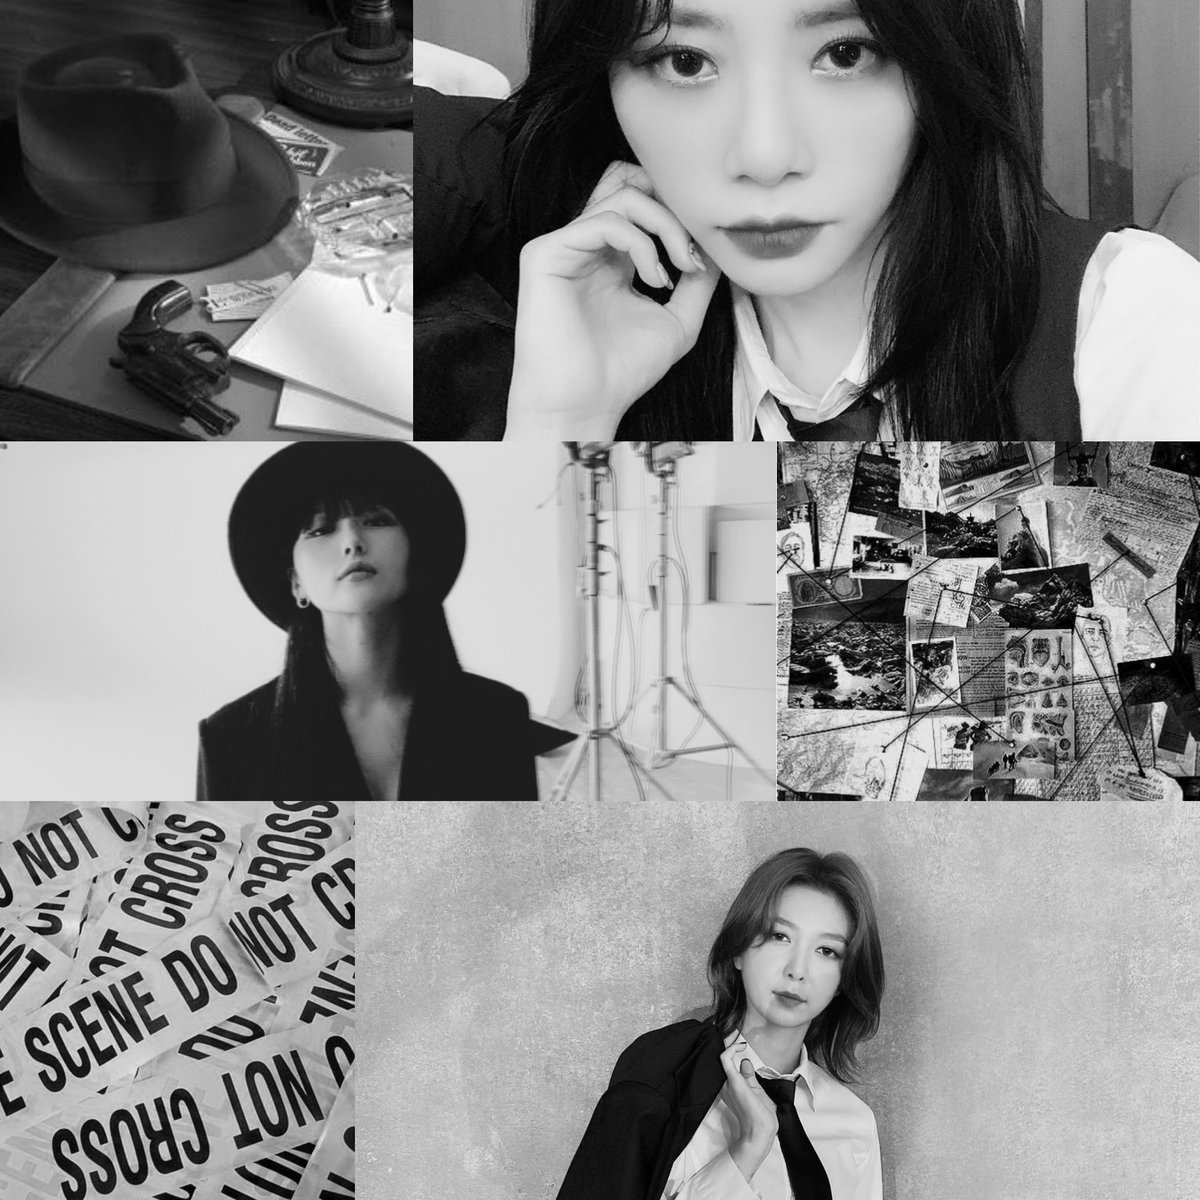 "chase me, catch me if you can"private detective kim minji and police officer lee yubin have to work together while they hunt down criminal mastermind lee siyeon. caught up in a dangerous net of secrets, they end up falling in love... but can they really trust each other?